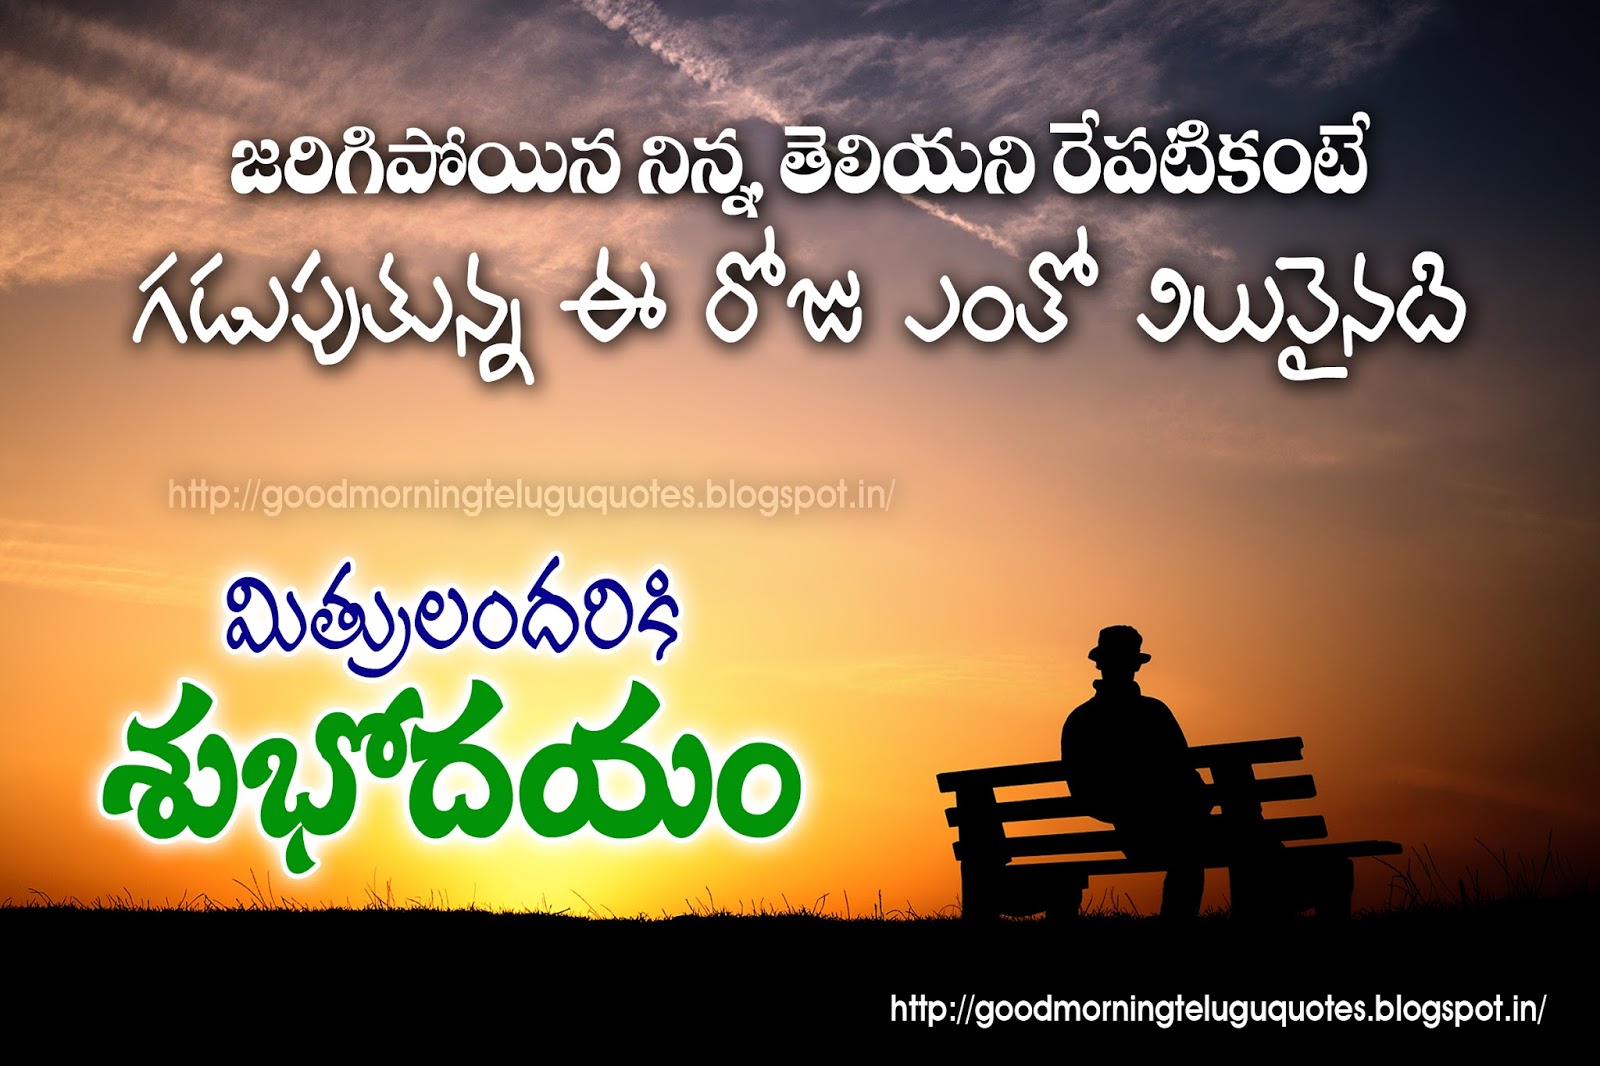 Heart touching Telugu good morning life quotes with hd images